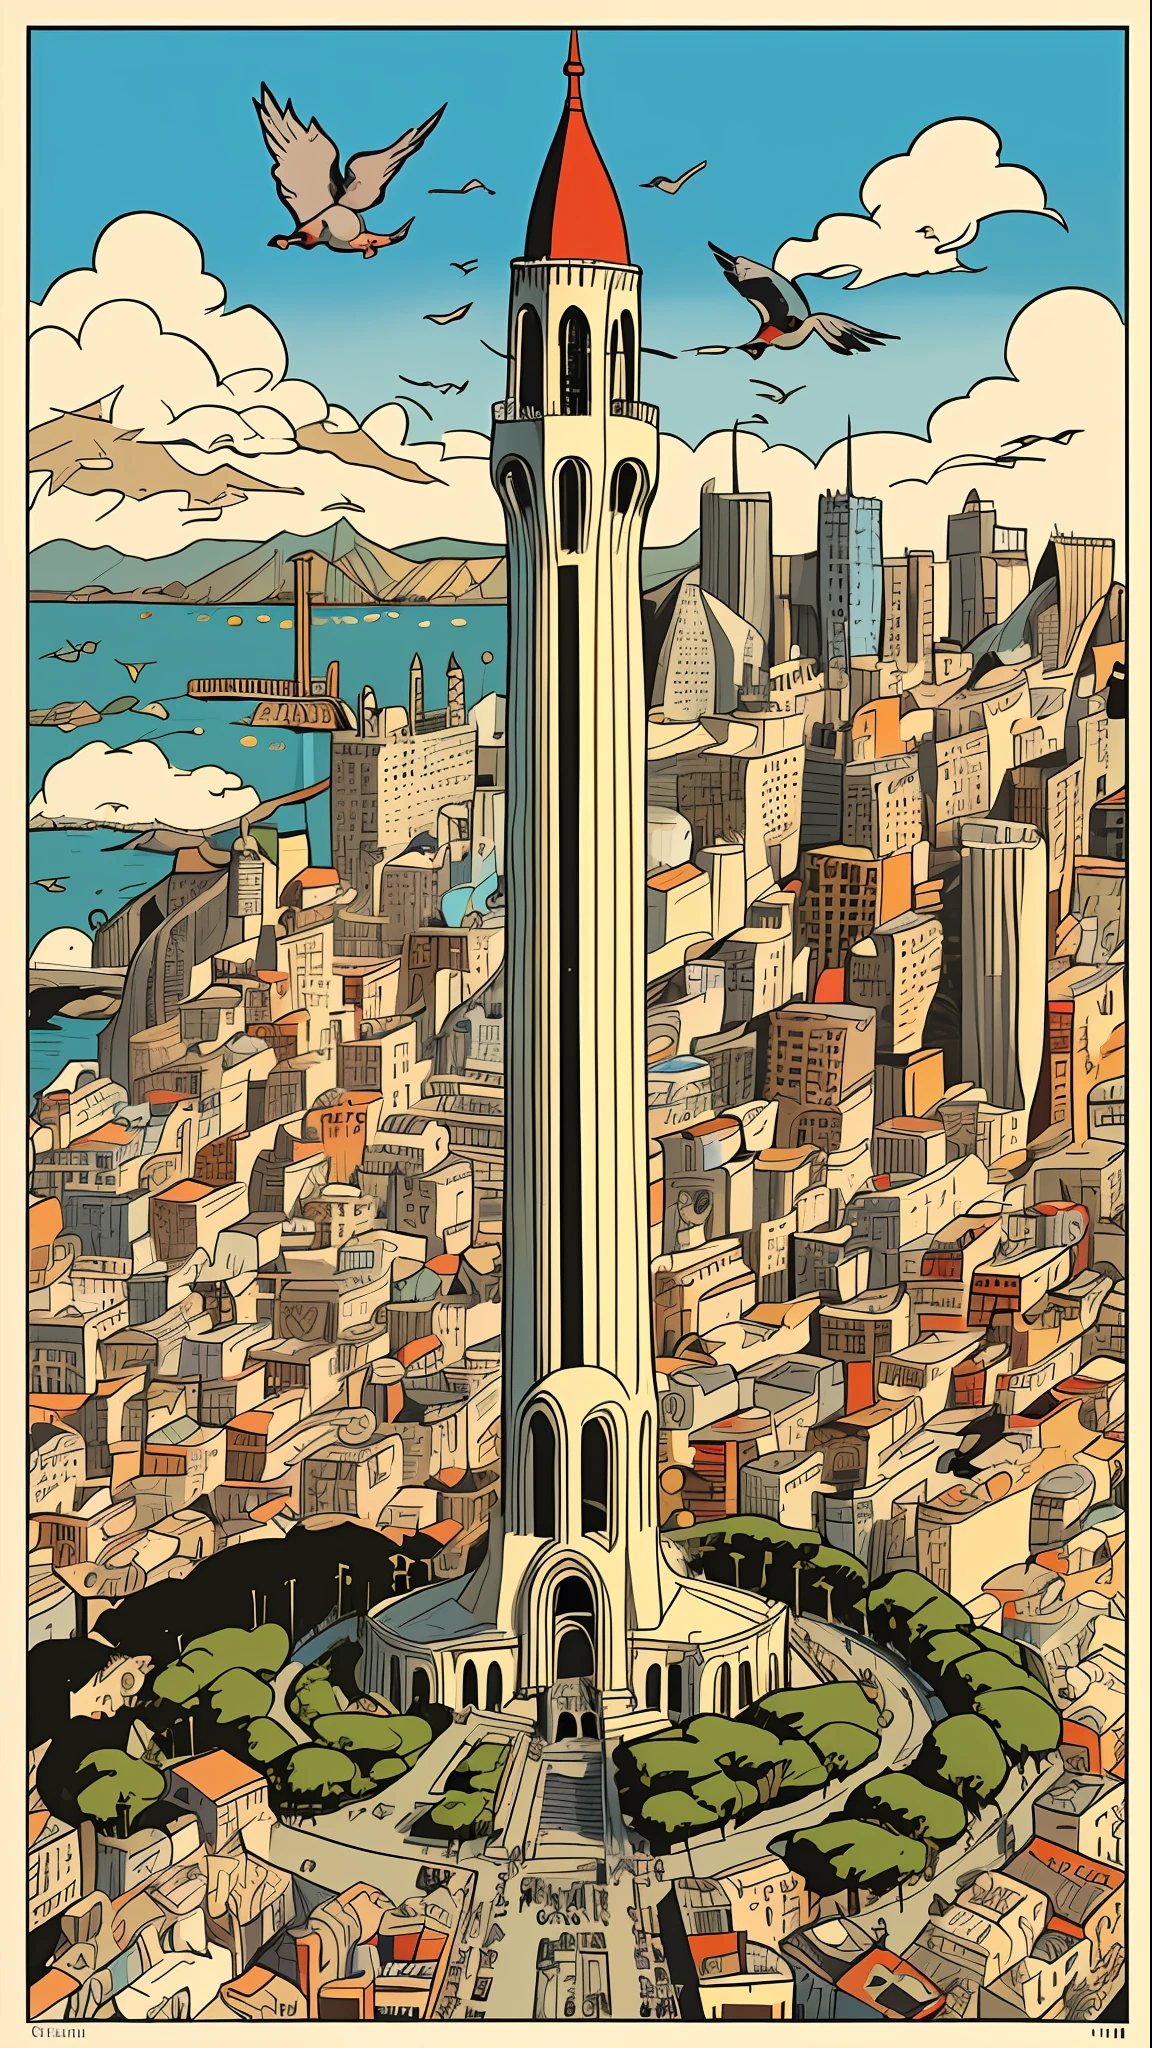 Chaotic maximalist San Francisco coit tower, bird's eye view and flying gastlis, illustrated by Herg, tin tin, pen-and-ink comic book style